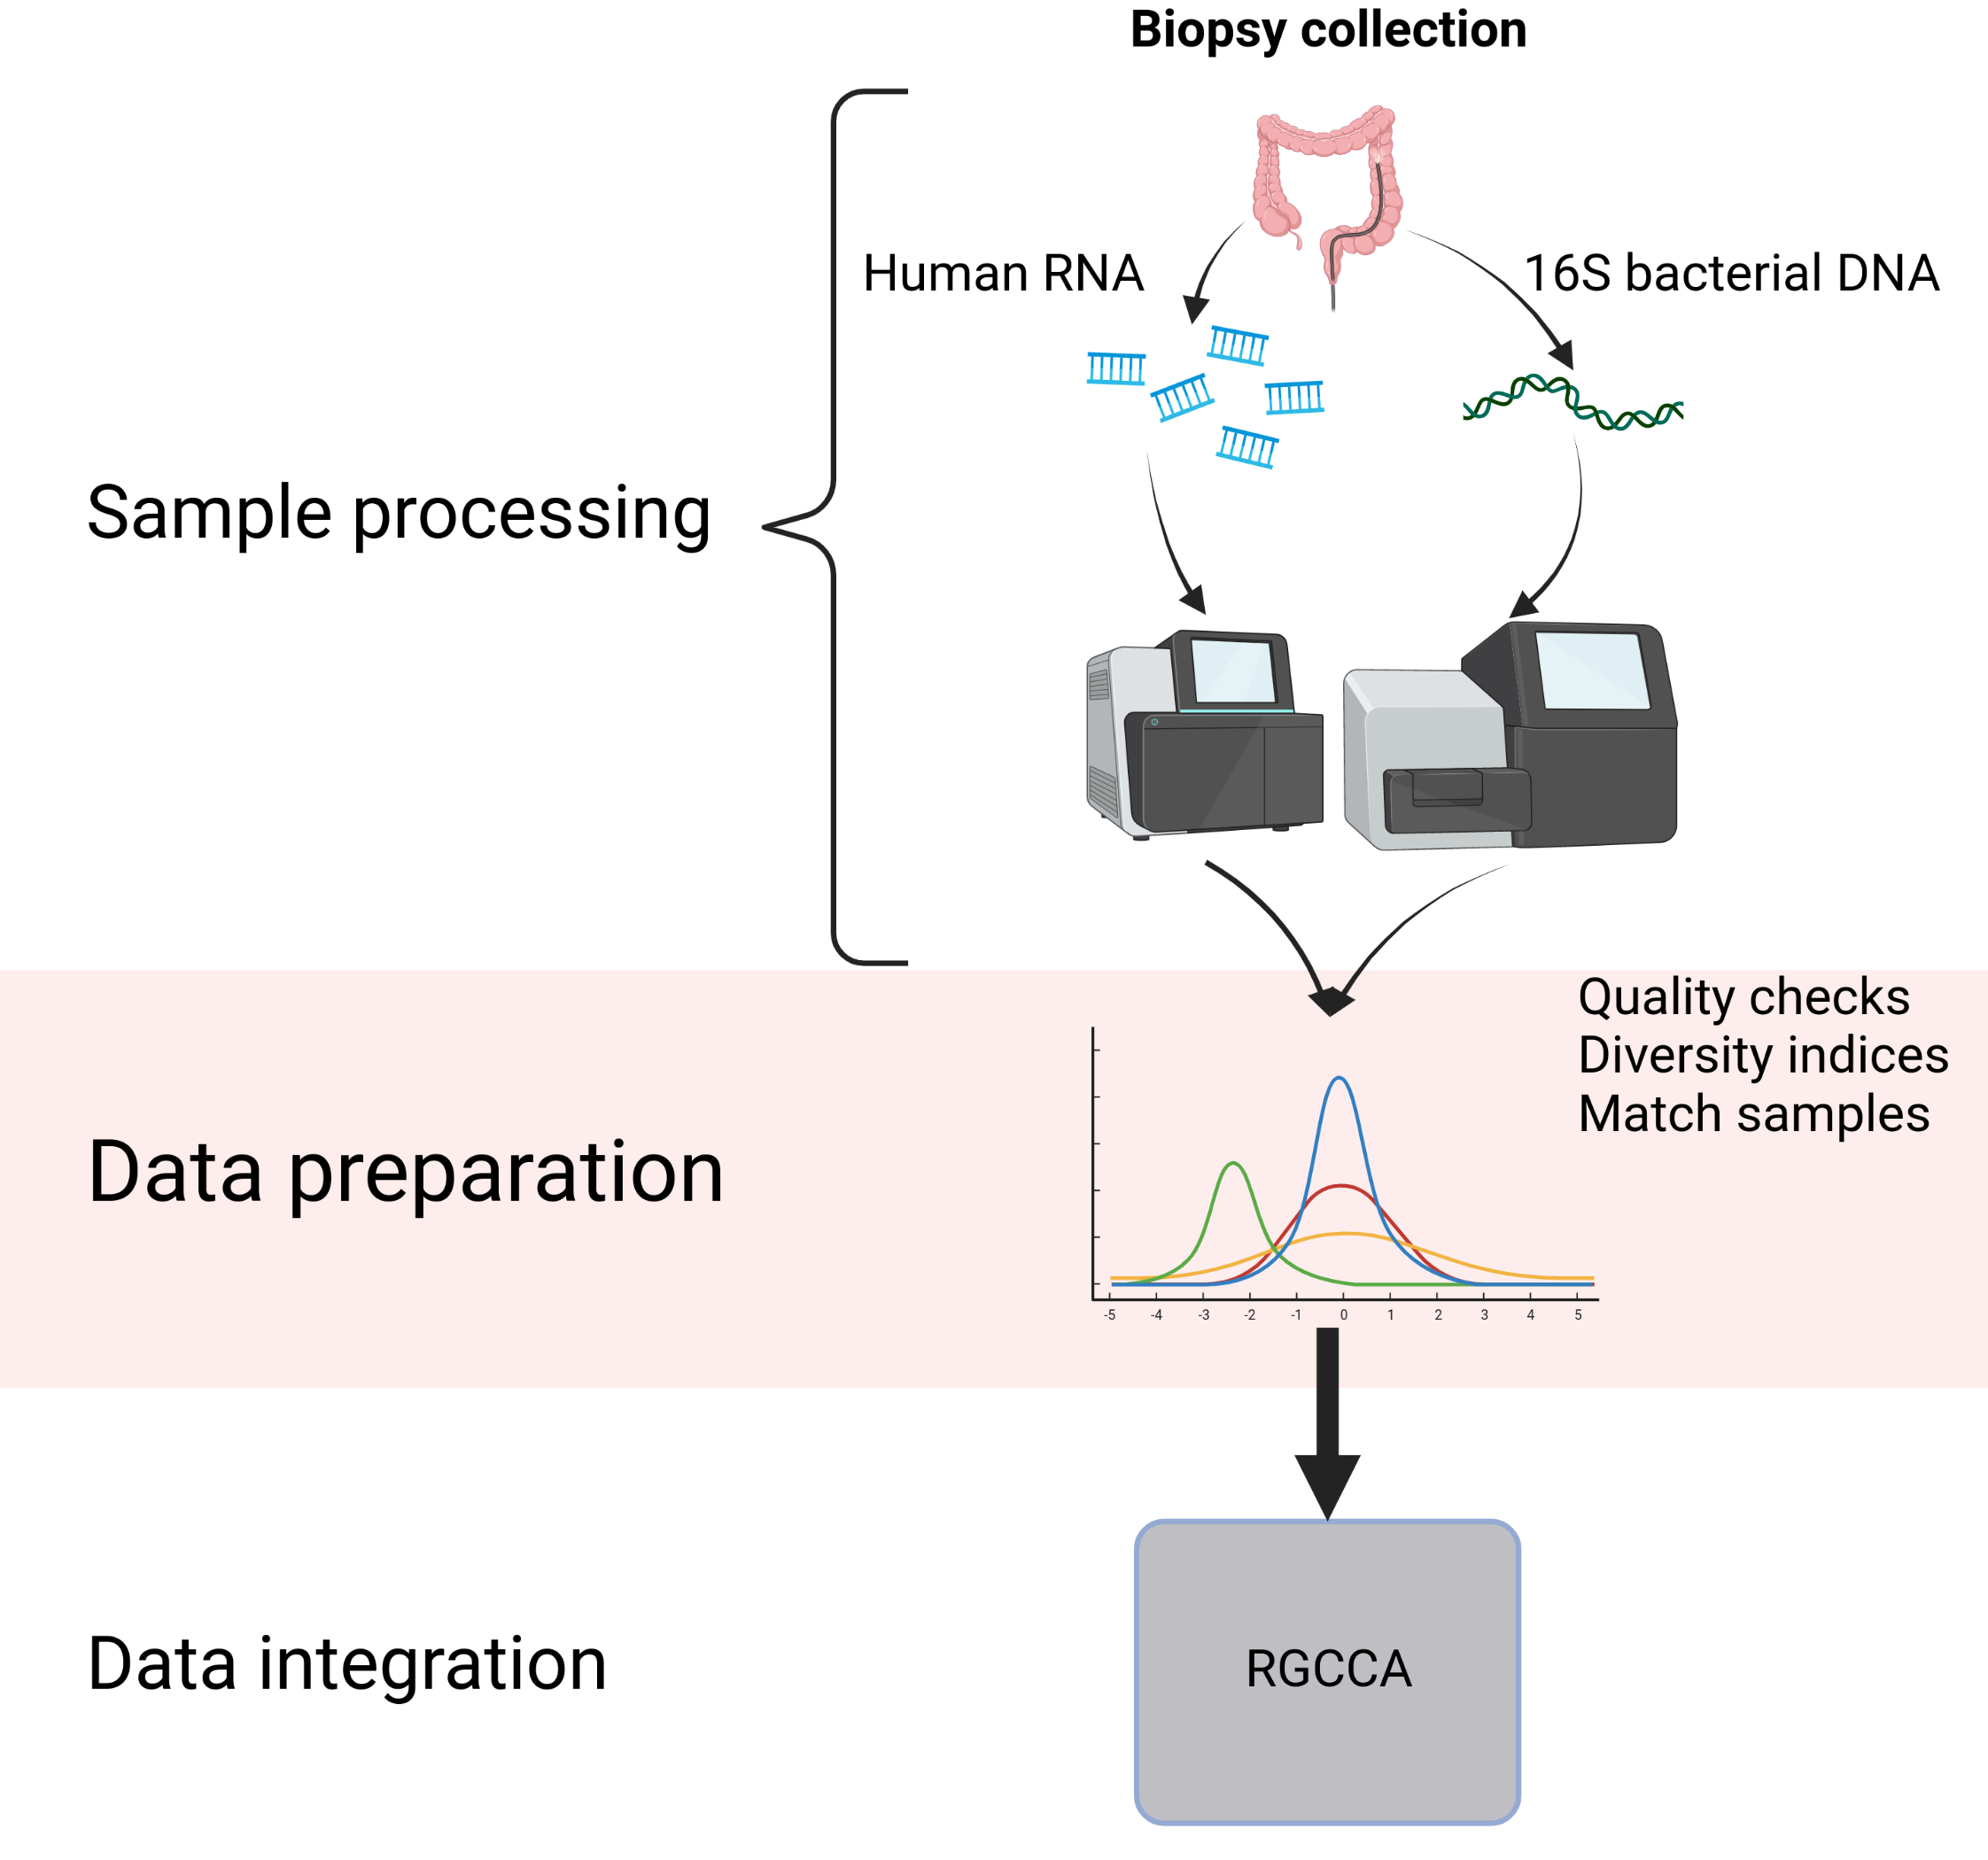 Workflow of the main analysis process of the thesis. It shows the biopsy collection, extraction of genetic and transcriptomic material, sequencing and analysis. Created with BioRender.com